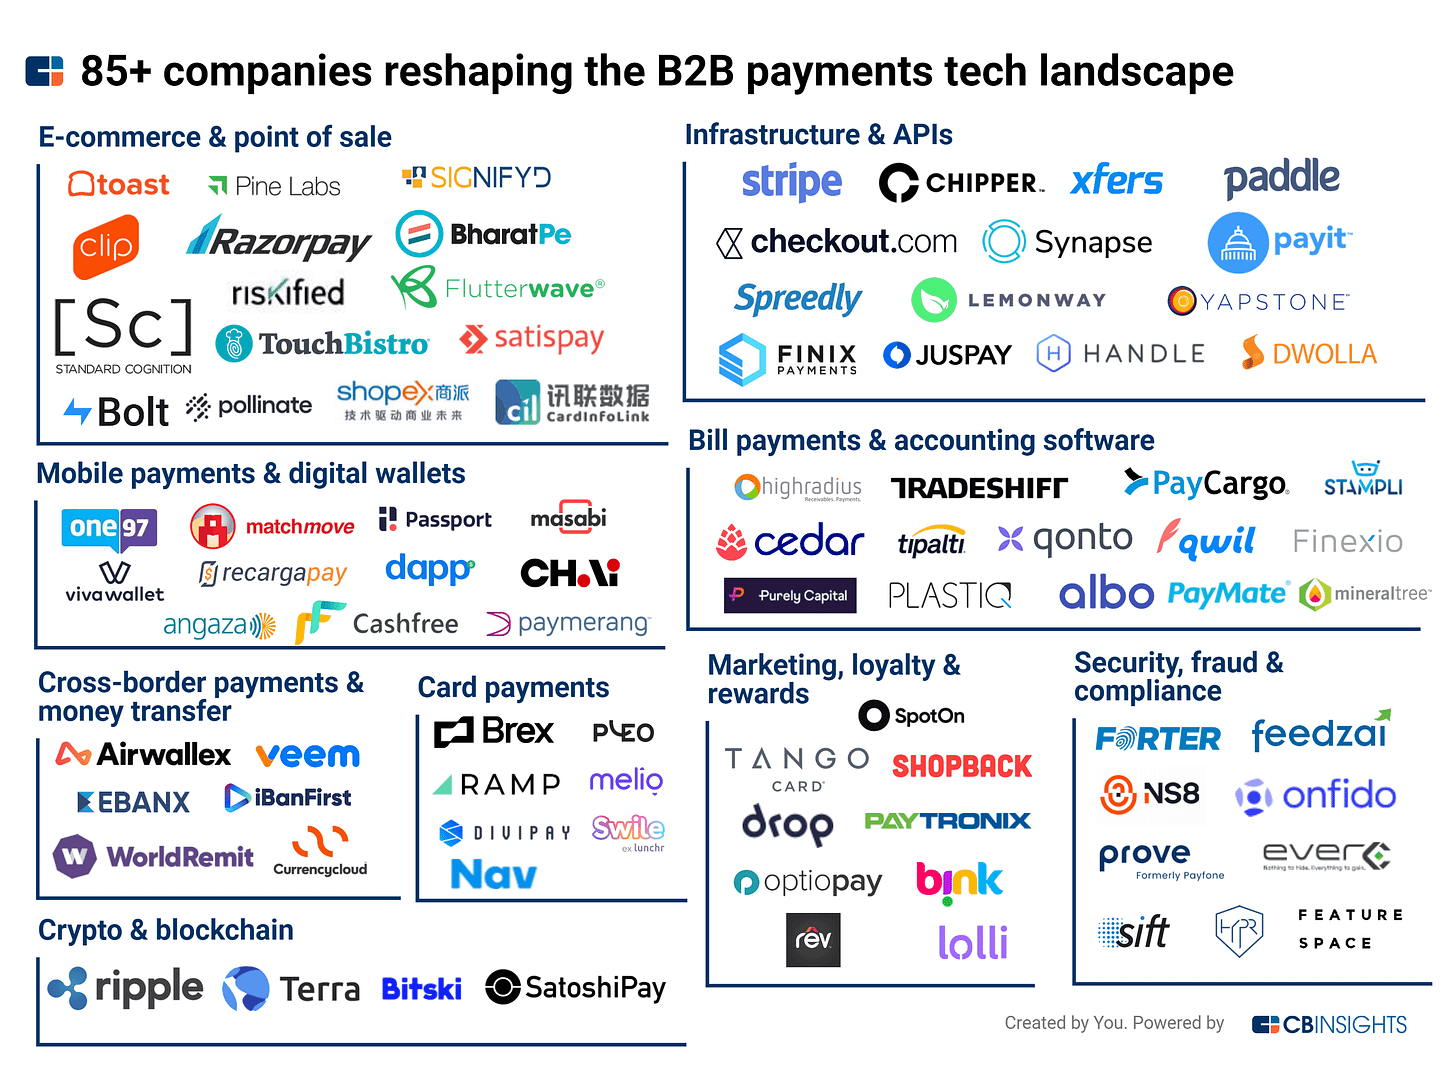 85+ Companies Reshaping The B2B Payments Tech Landscape - CB Insights  Research